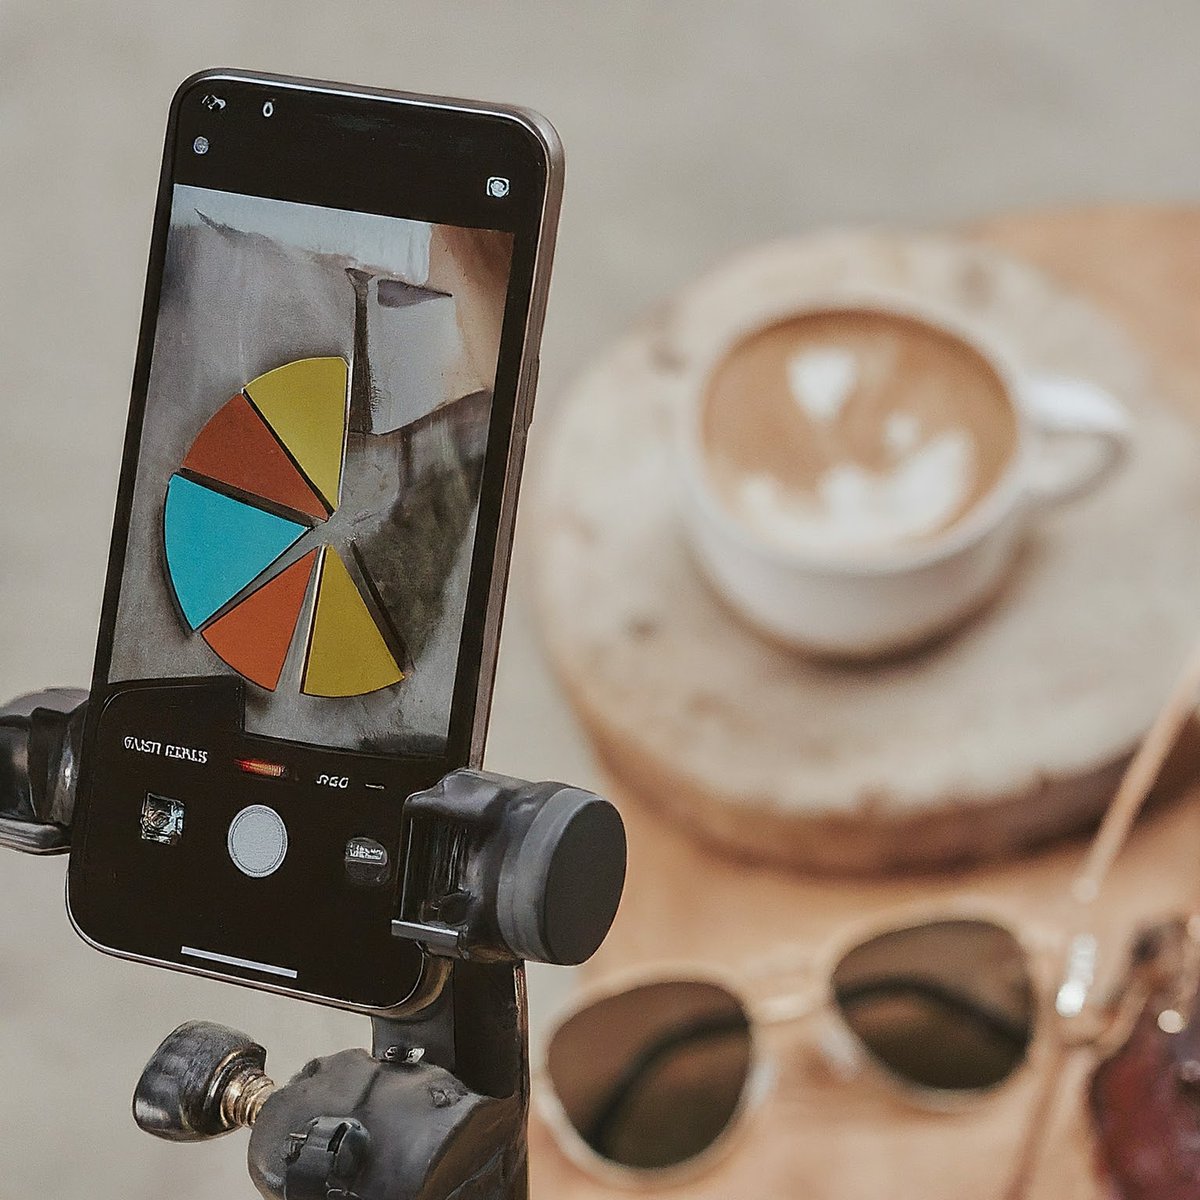 Stand out in the crowded influencer space! This week's trends emphasize the importance of creative and engaging content in influencer marketing campaigns. #EngagingContent #InfluencerMarketingIdeas